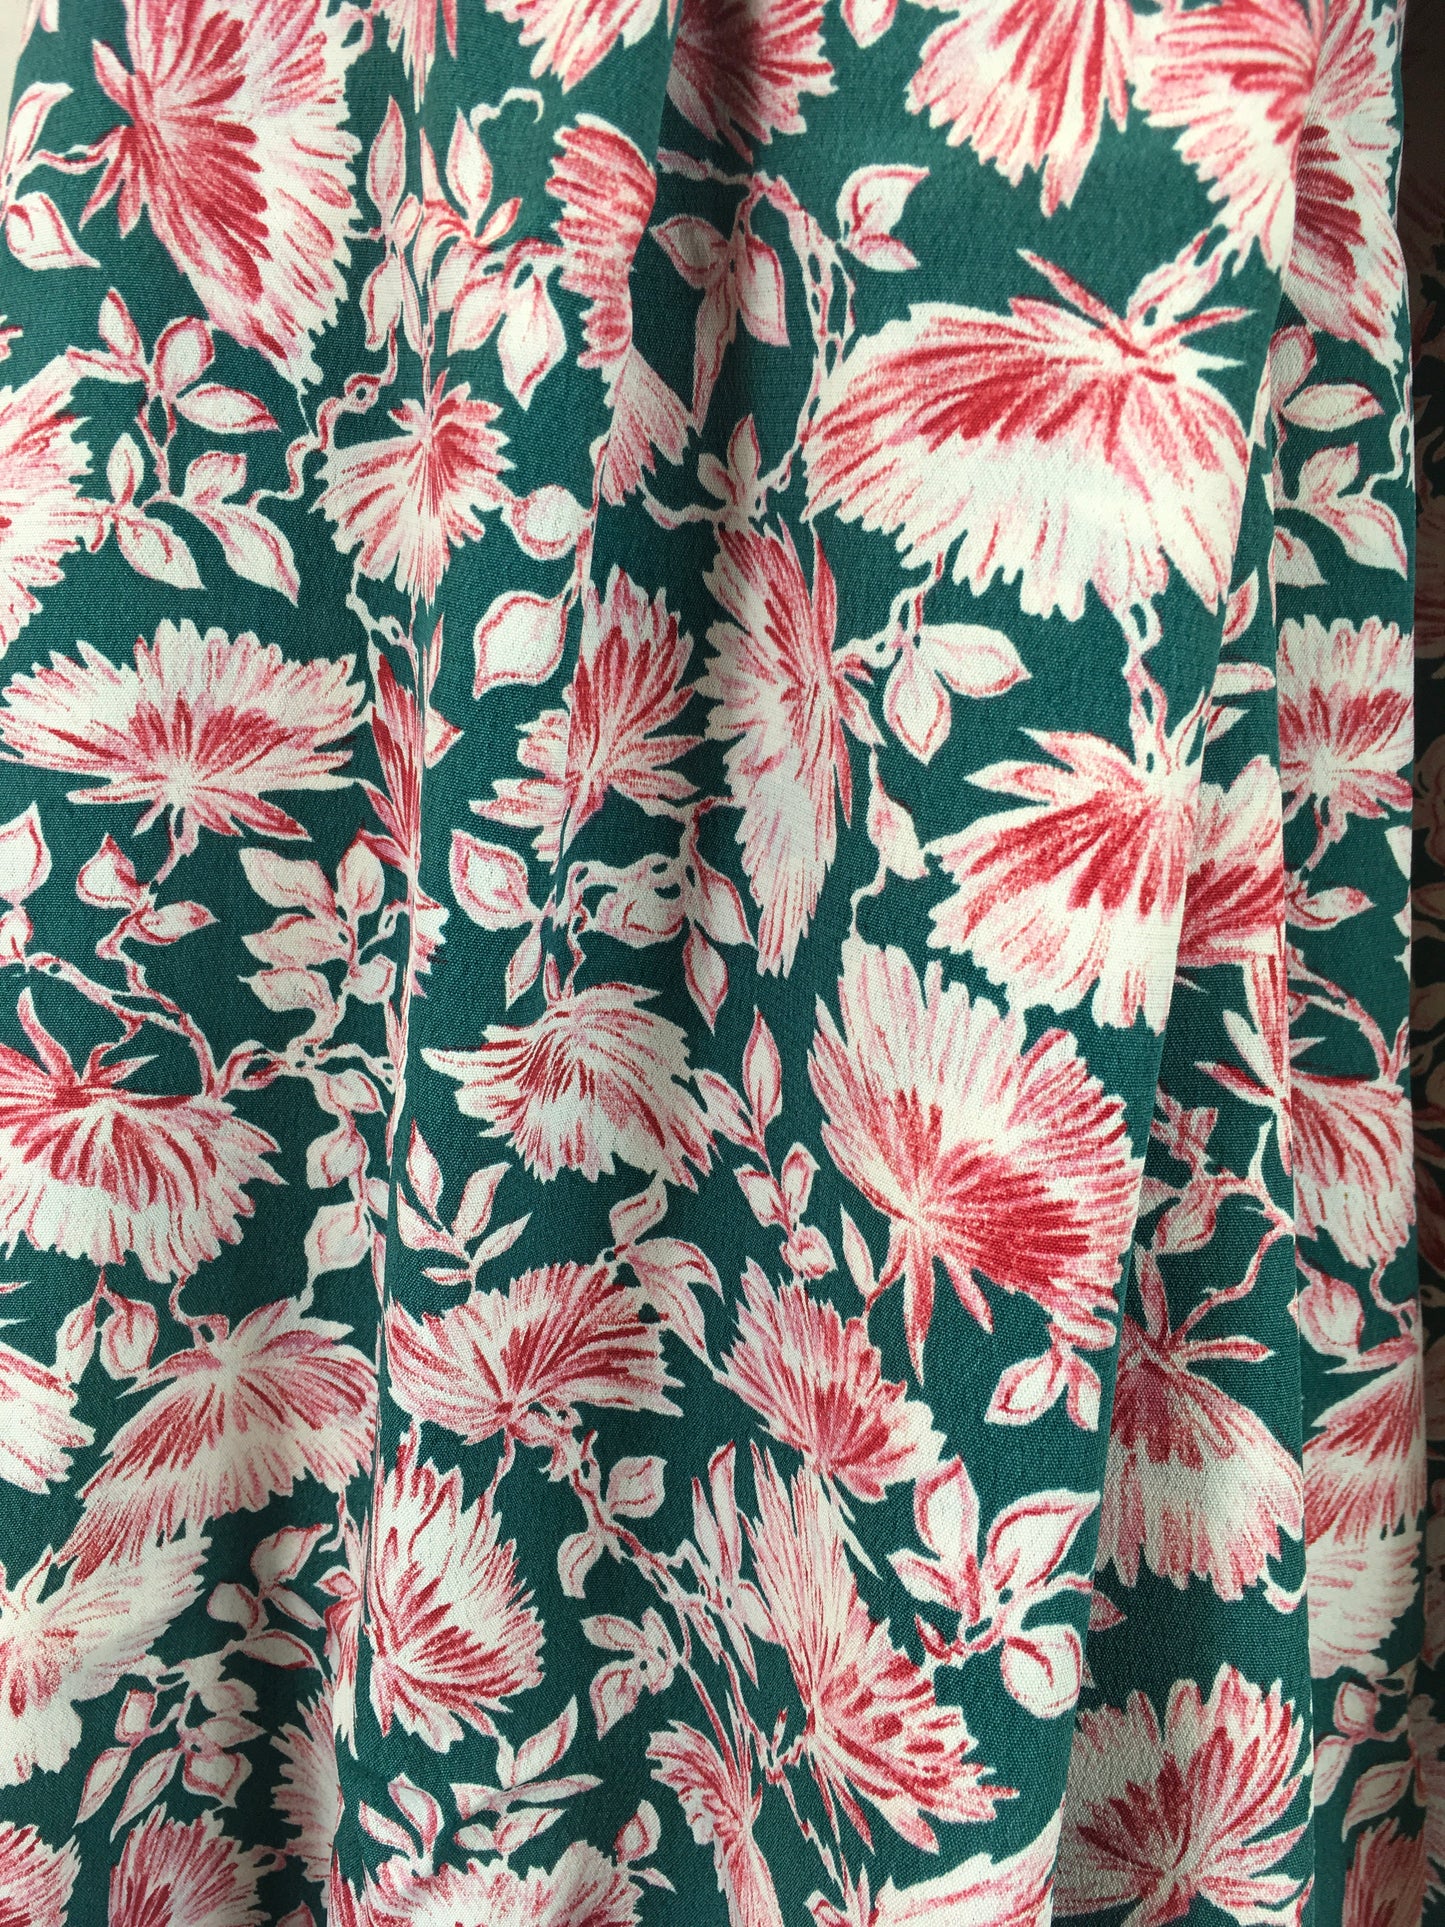 Original 1940’s Rayon Crepe Fabric - In A Jade Green and Deep Wine Floral 1.2 Metres